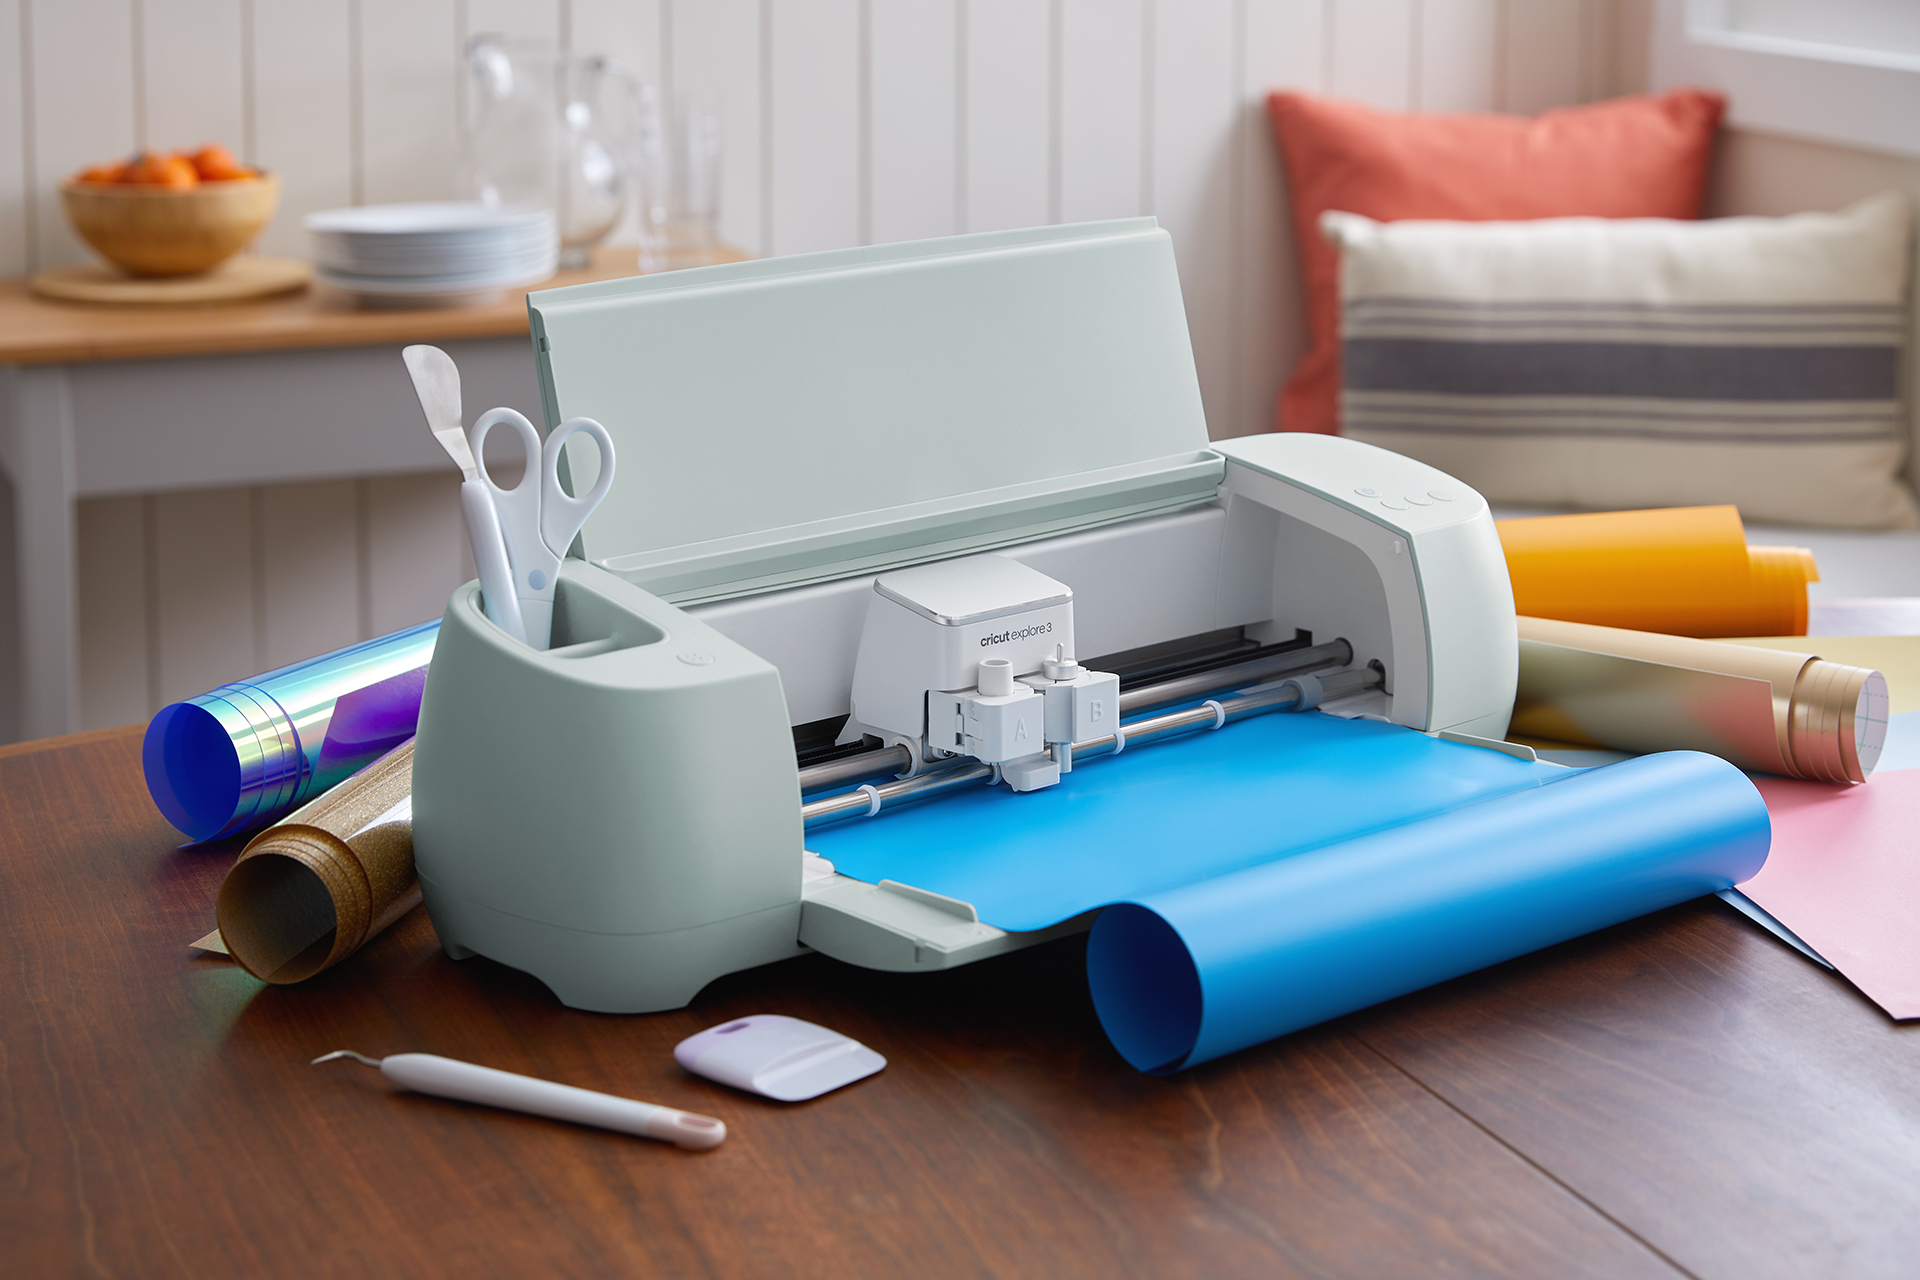 6 things to know about Cricut materials